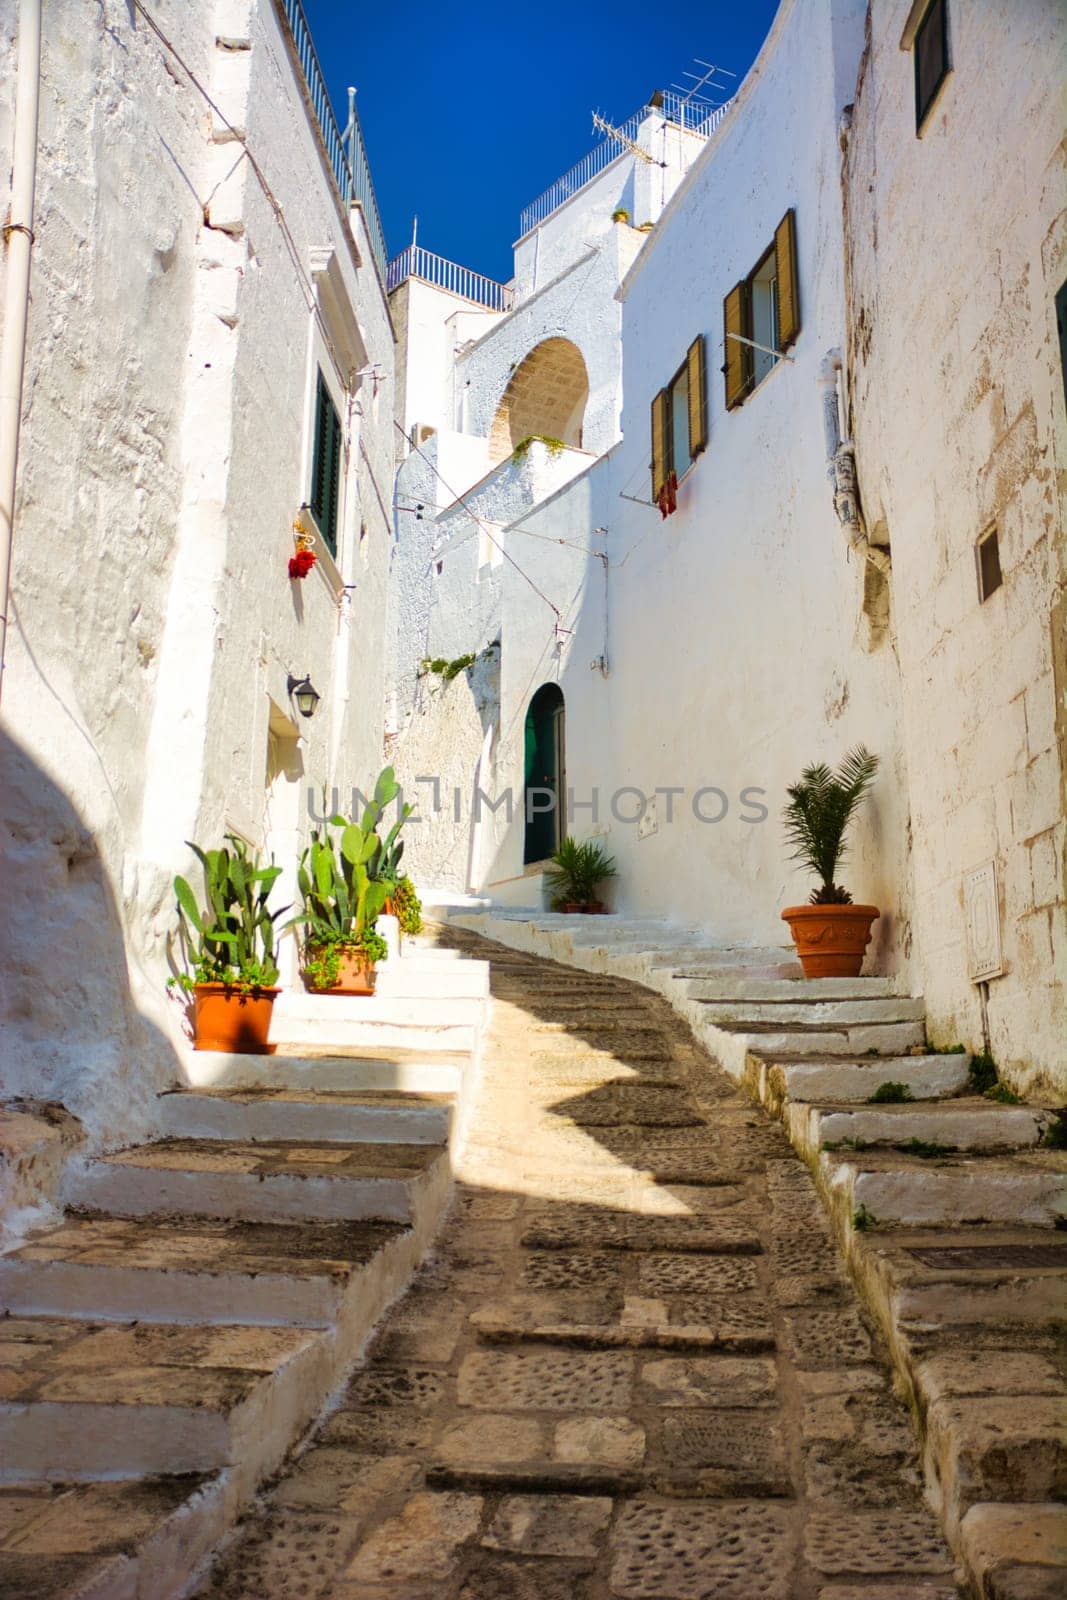 A charming street in Ostuni, Italy, adorned with potted plants and cobblestone paving by artofphoto